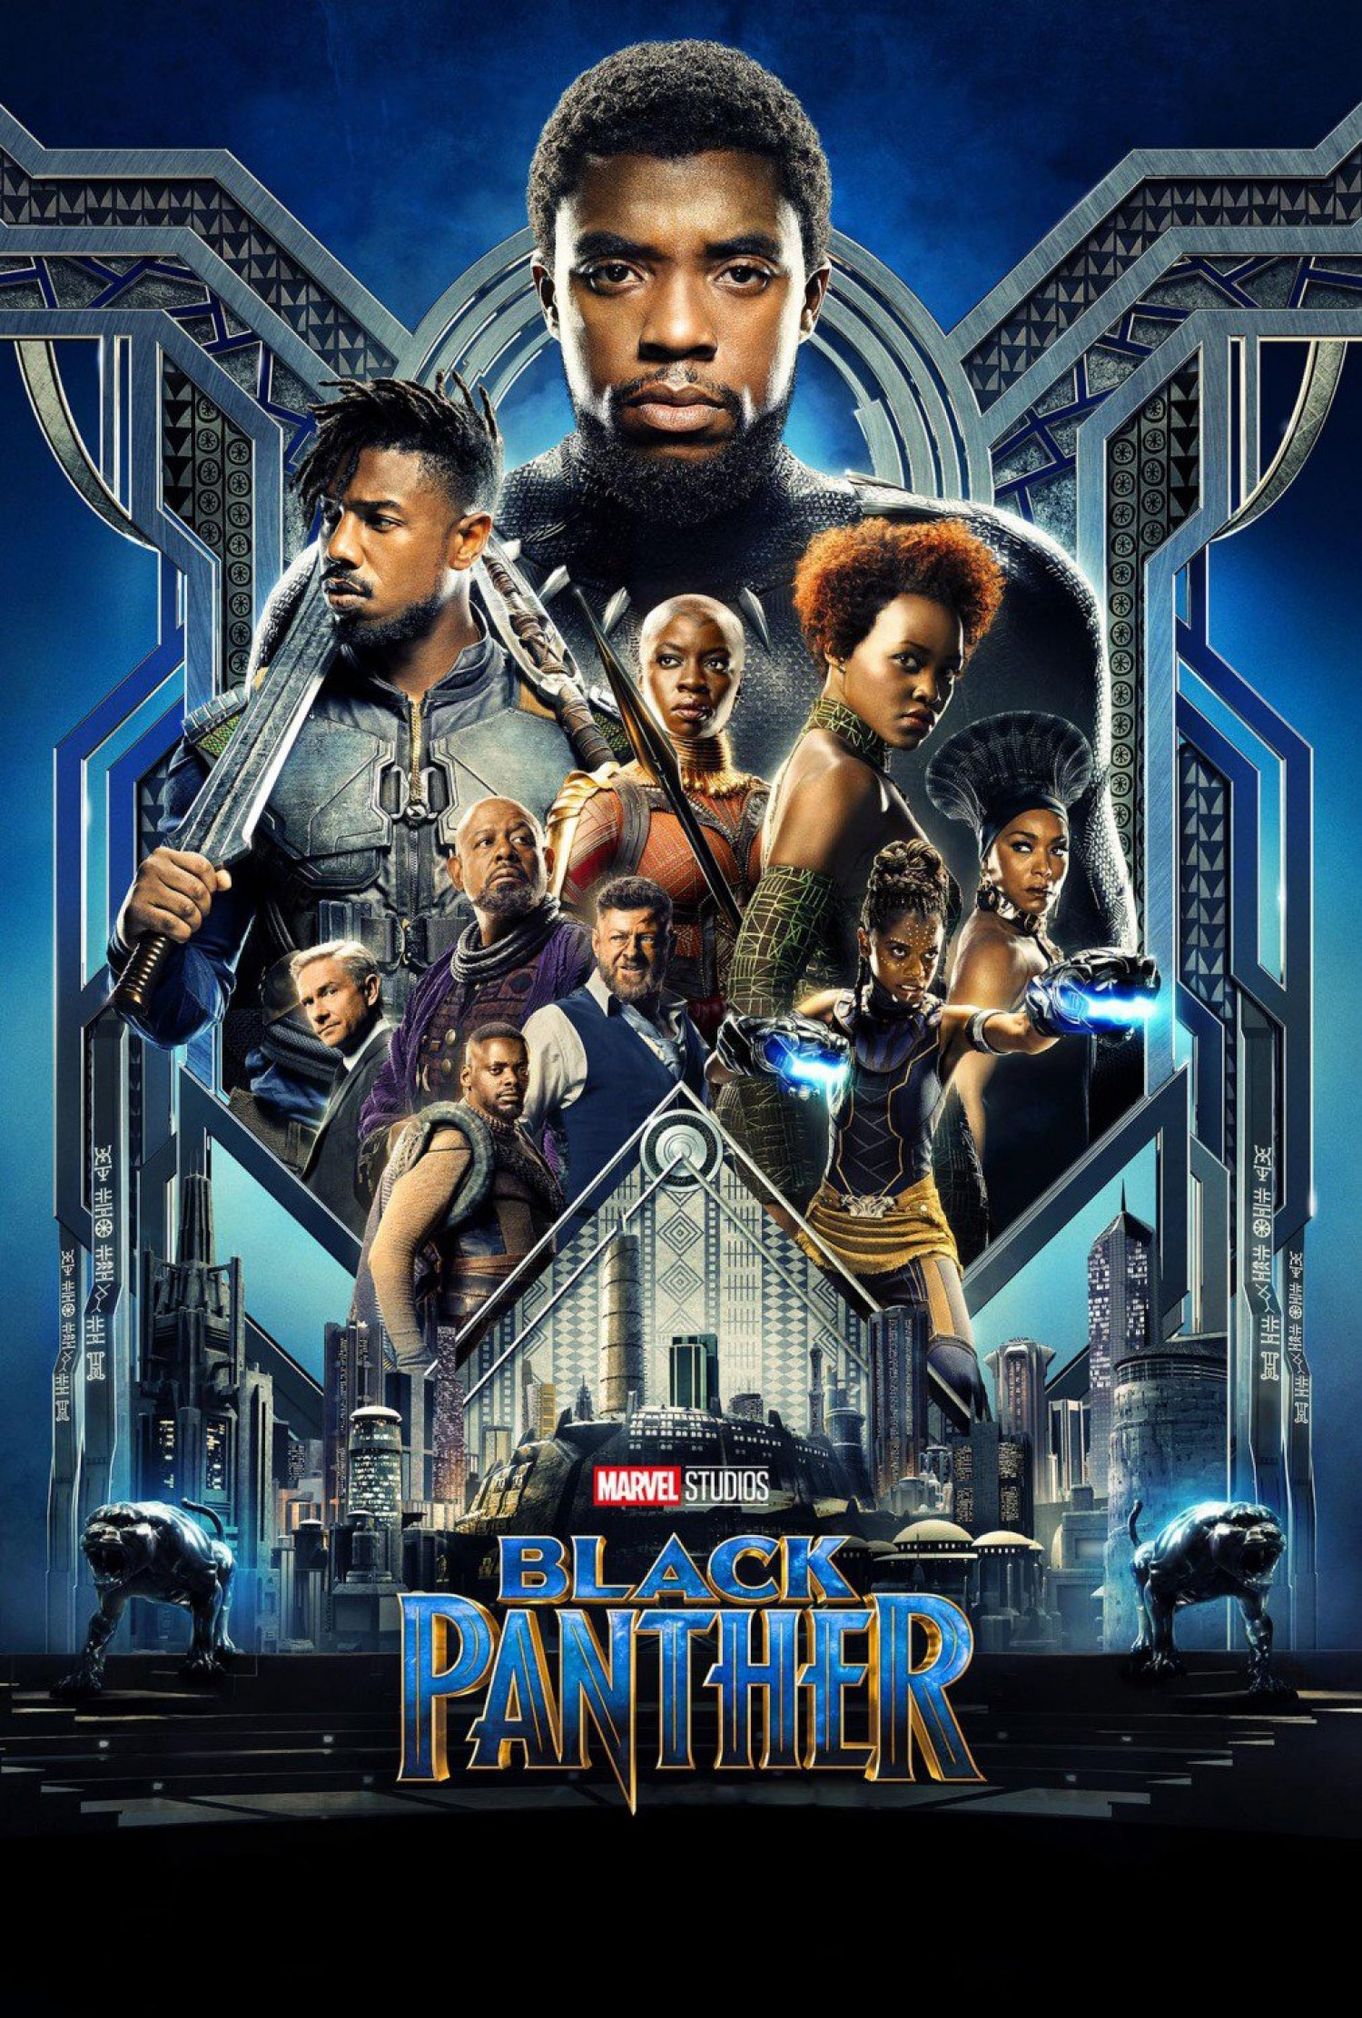 BLACK PANTHER (12A)